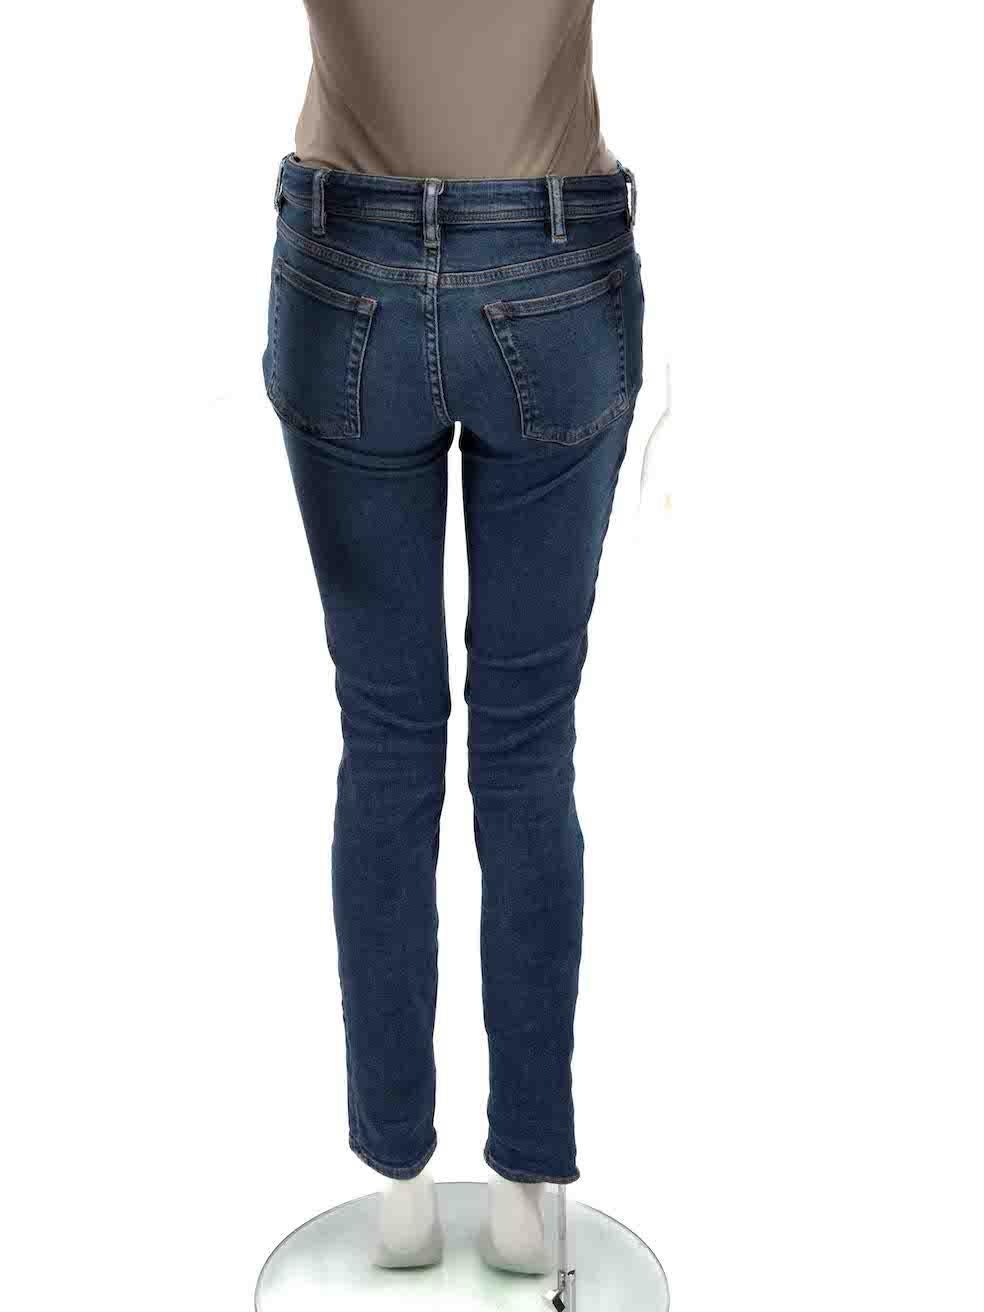 Acne Studios Blue Denim Low-Rise Skinny Jeans Size M In Excellent Condition For Sale In London, GB